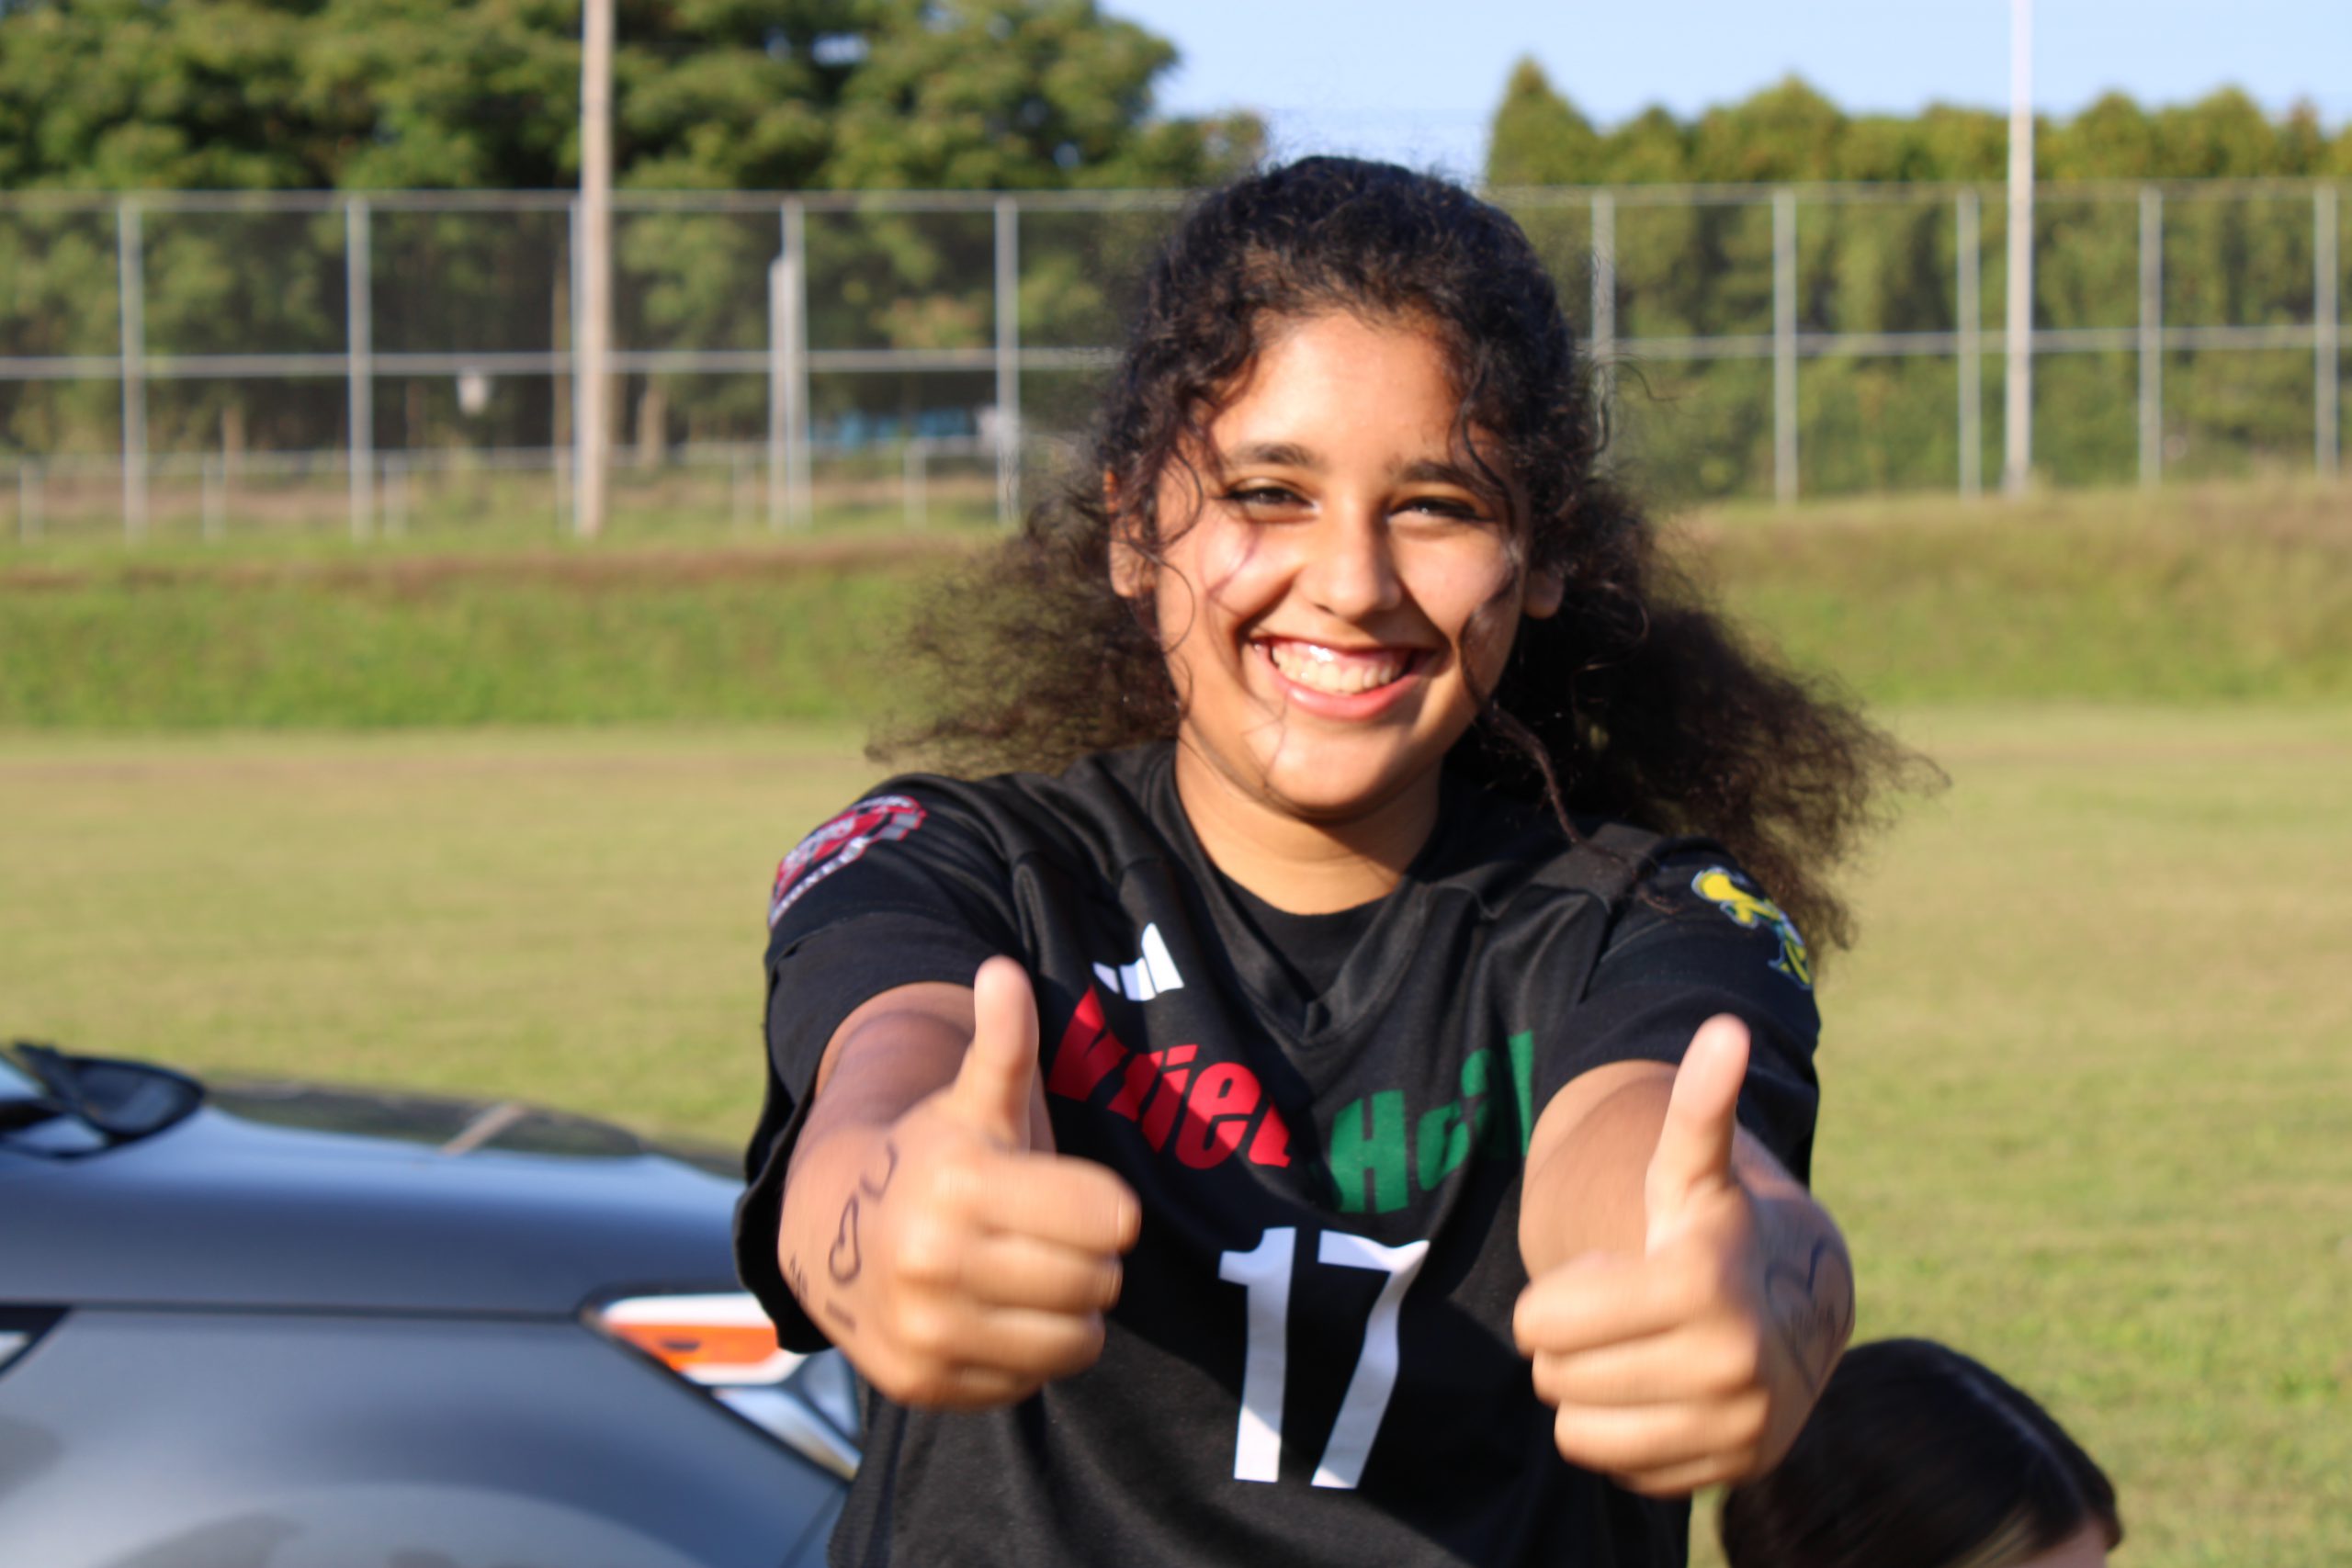 Girl in Soccer Uniform looking at camera with two thumbs up